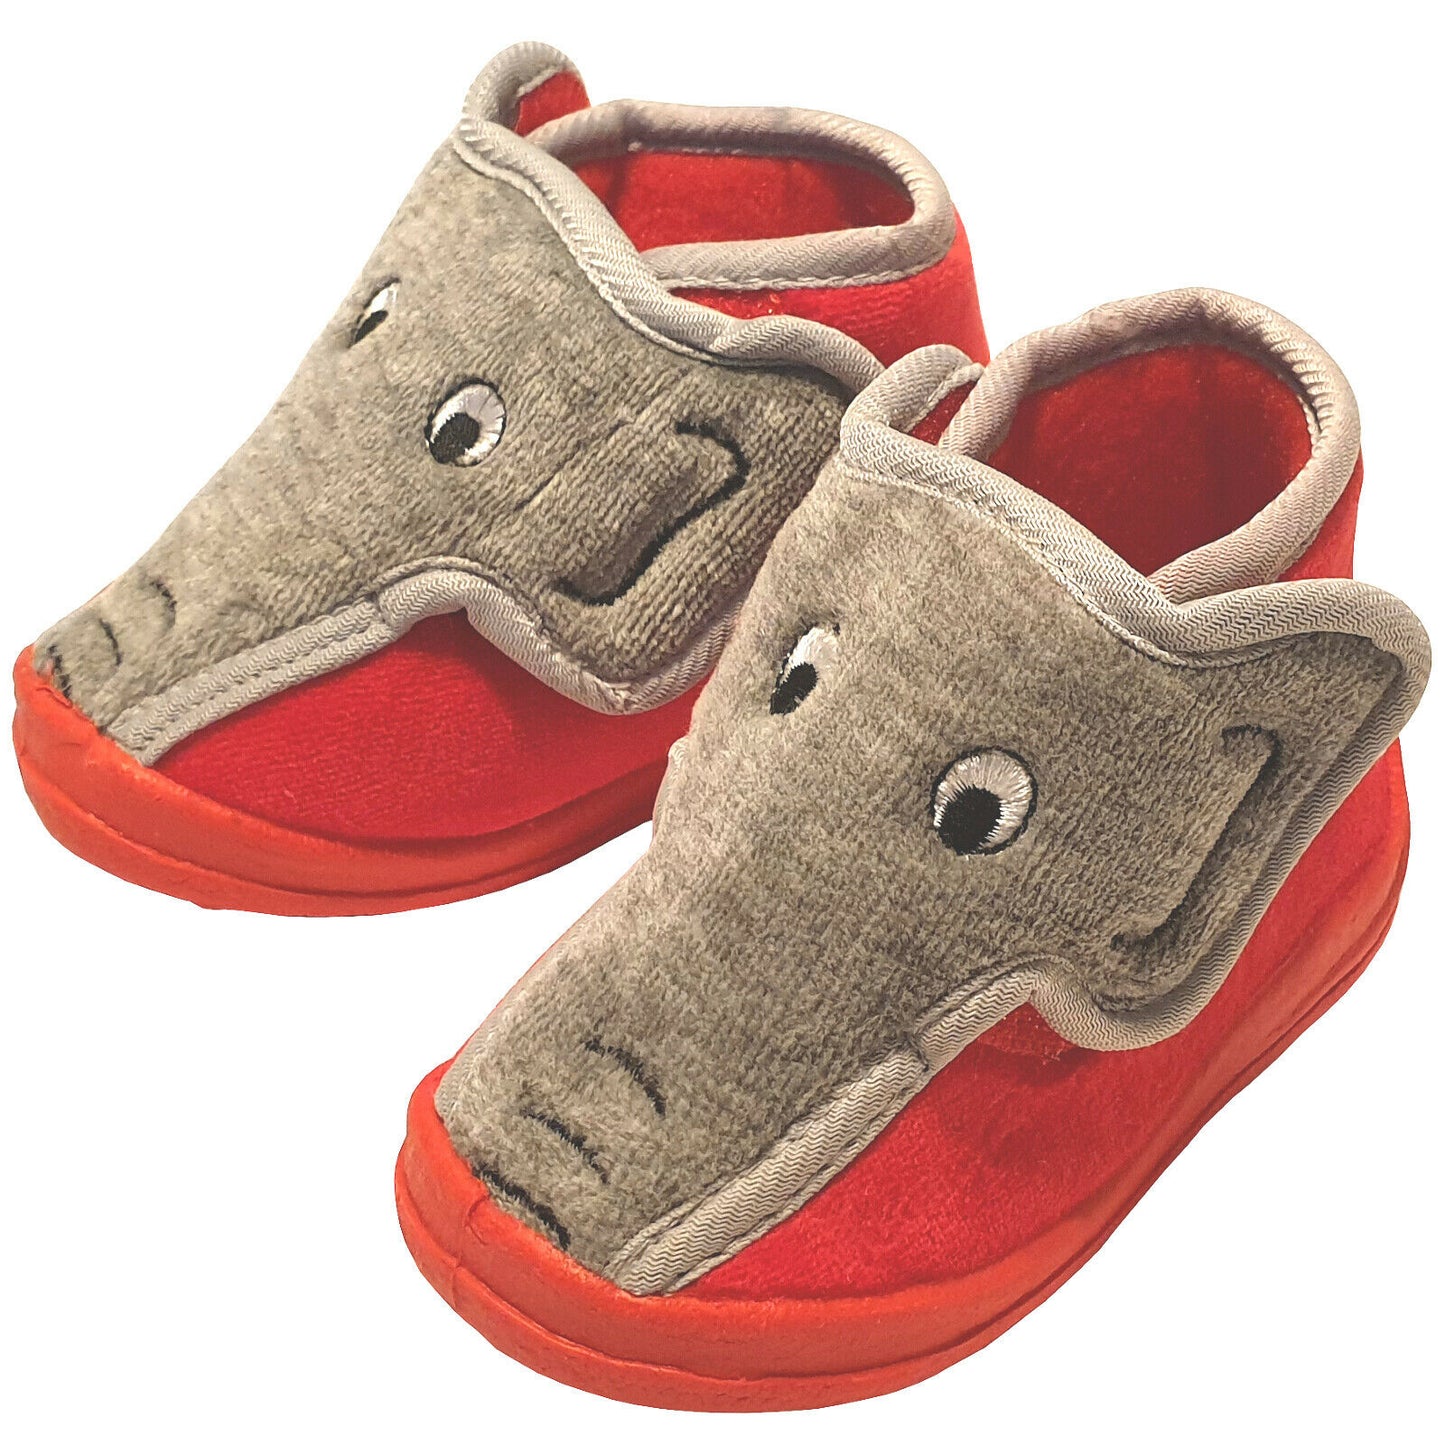 Little Kids Red and Grey Elephant Design Bootie style Slippers